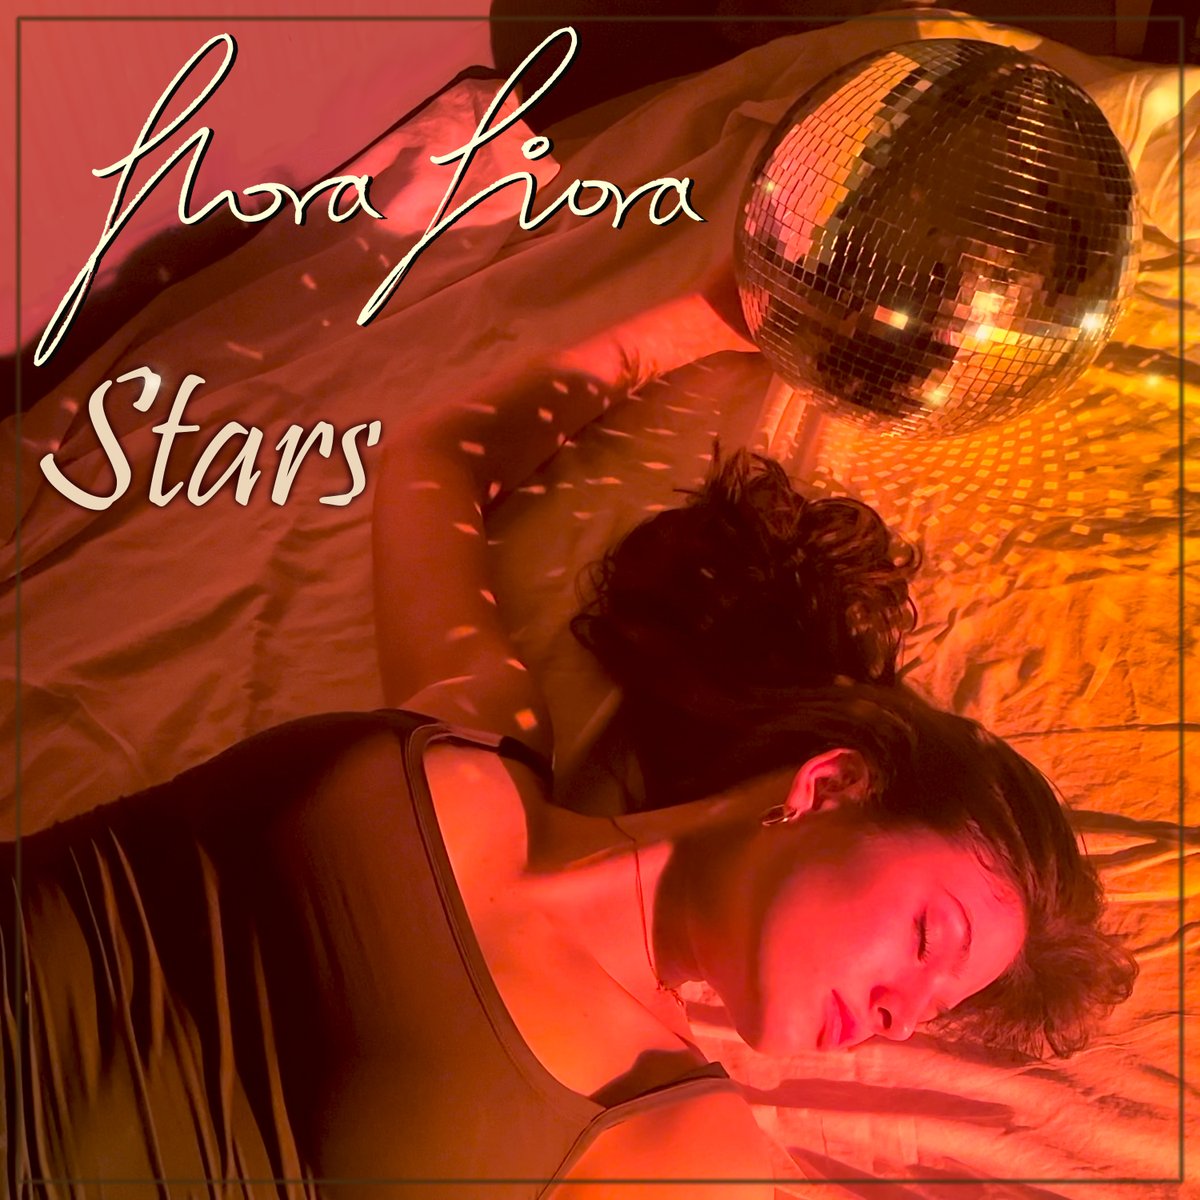 'Stars' drops in a week!! It's BandCamp Friday - play it now <3 florafiora.bandcamp.com/track/stars